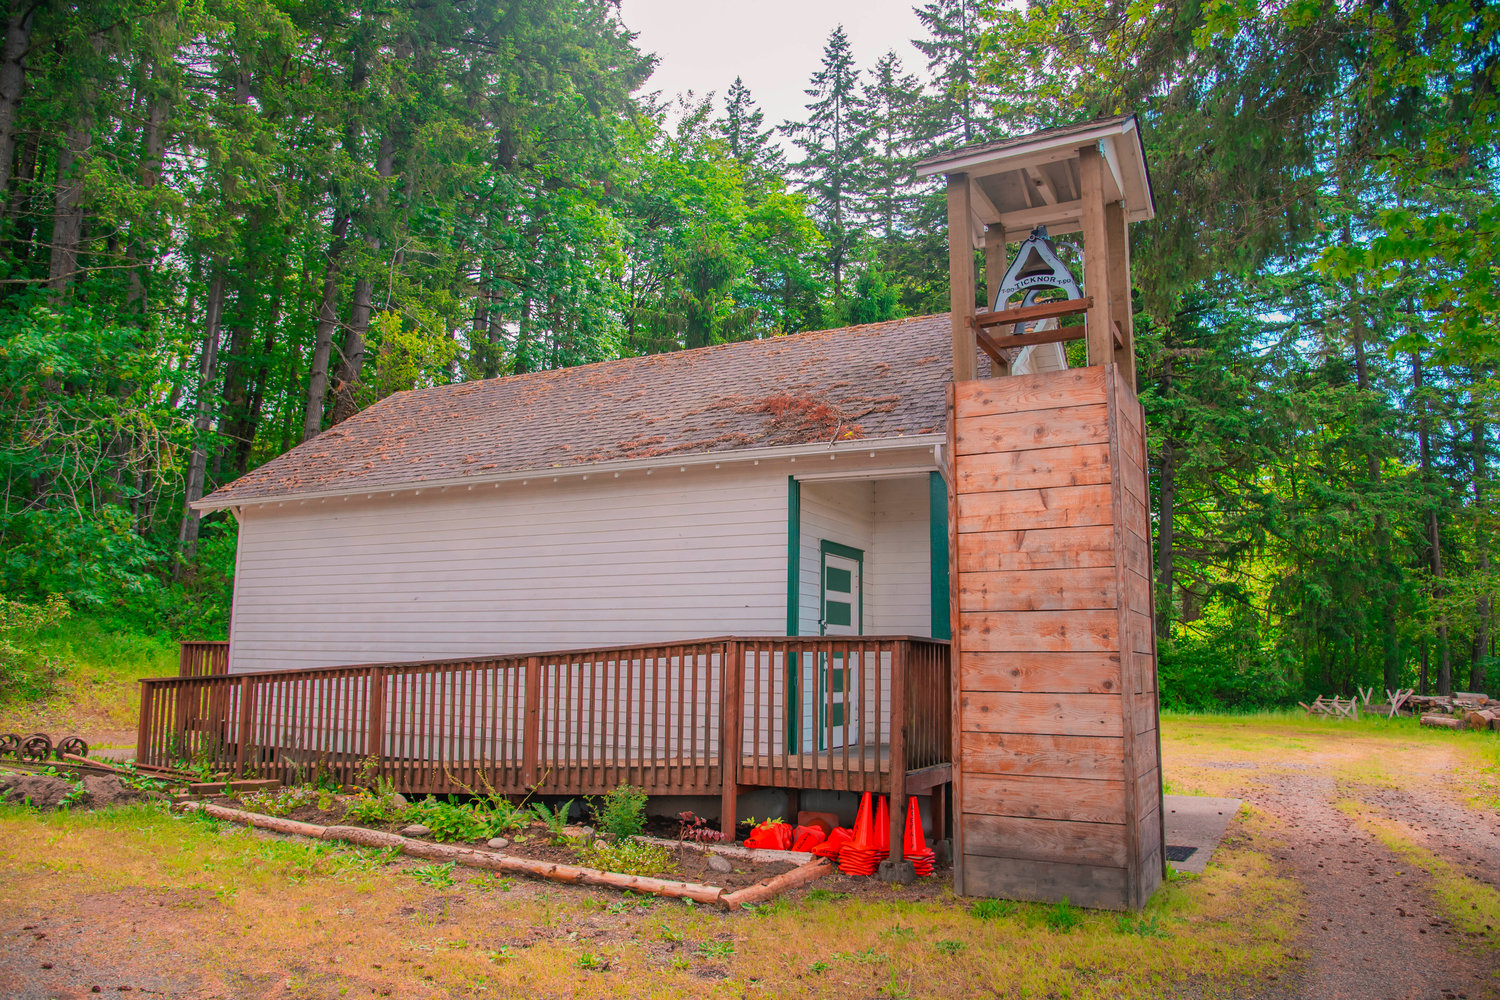 The Ticknor Schoolhouse sits just outside the Tenino Depot Museum.